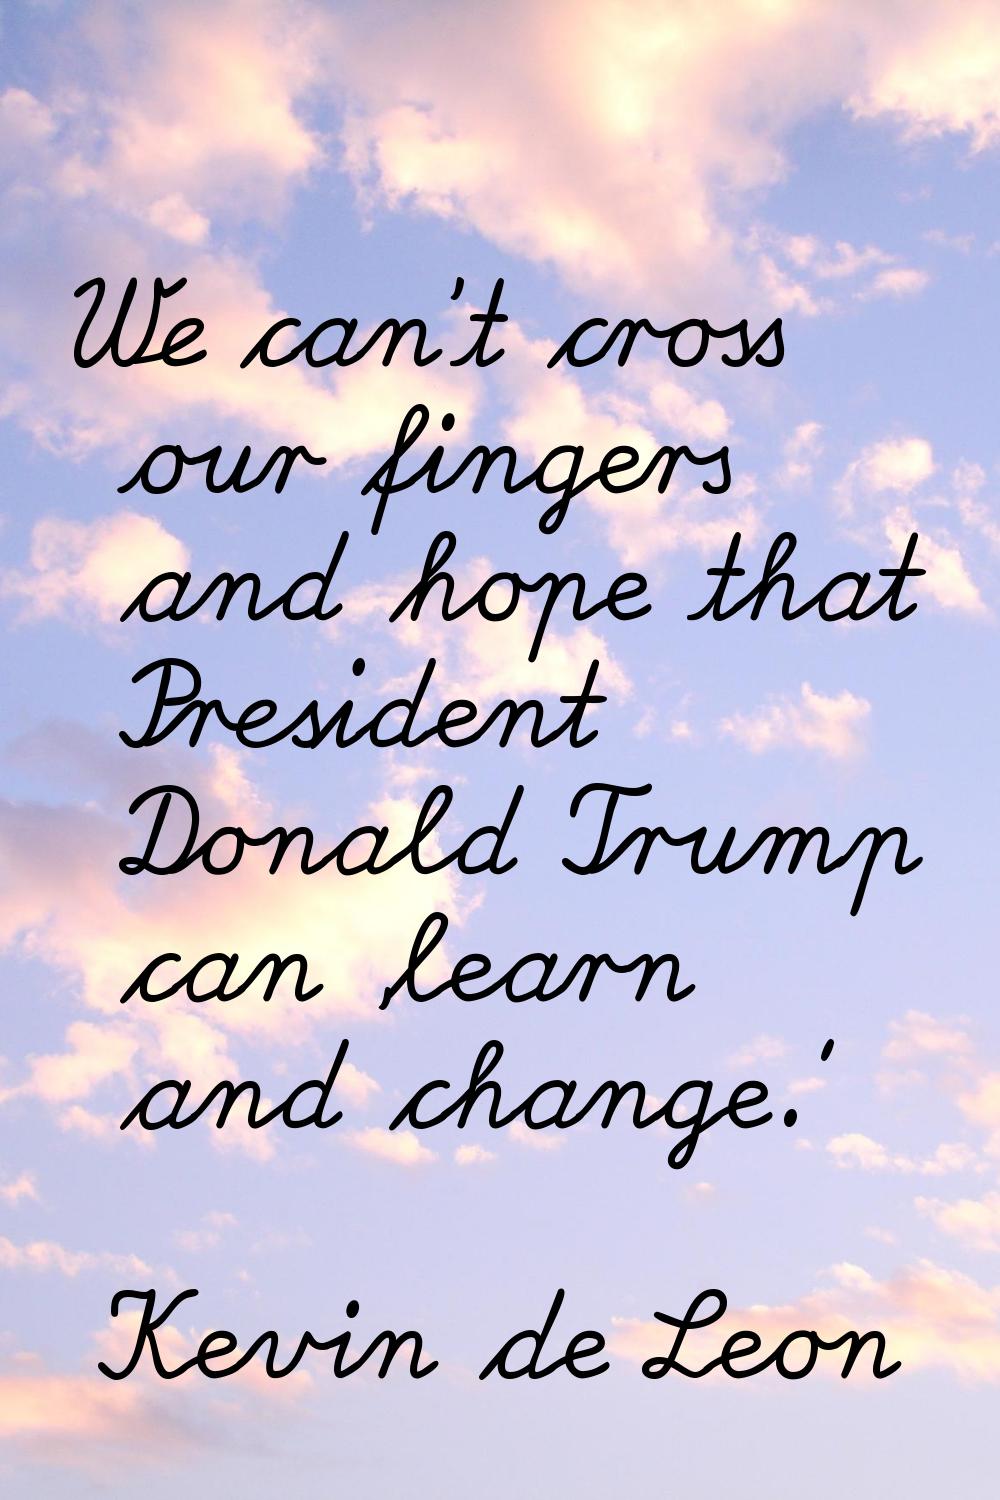 We can't cross our fingers and hope that President Donald Trump can 'learn and change.'